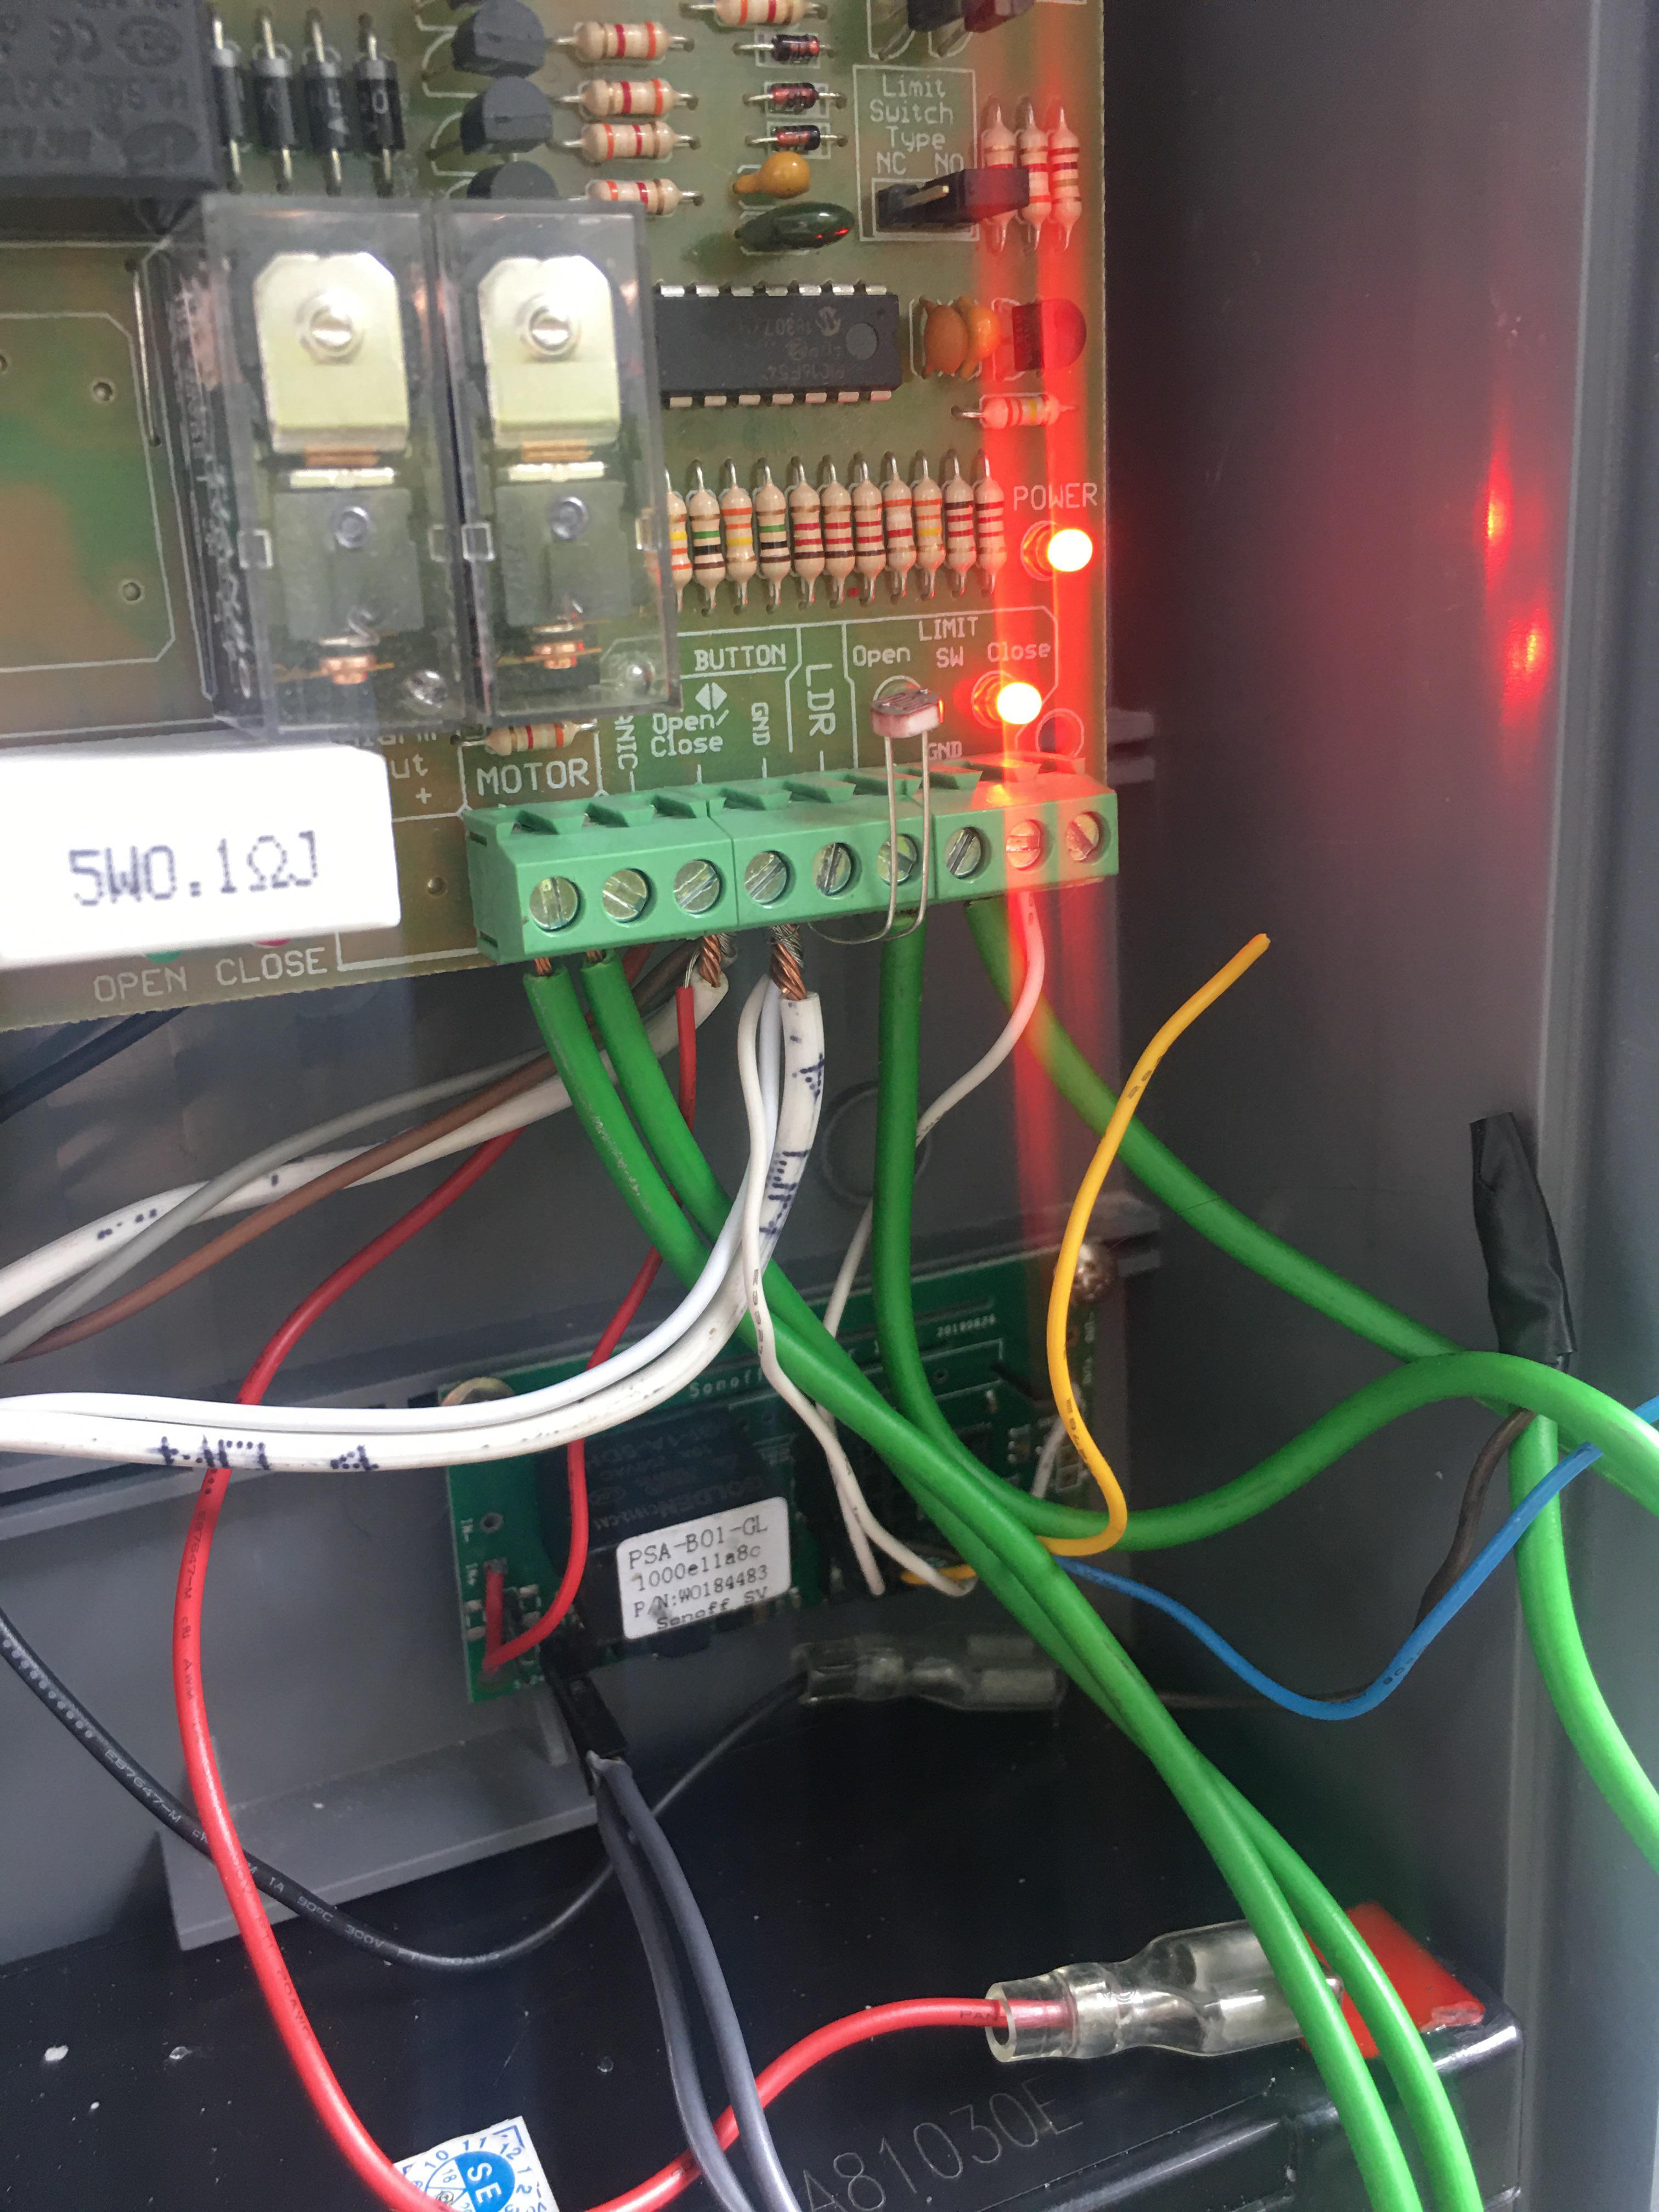 I managed to connect a lightning Sonoff SV with Ravensystem